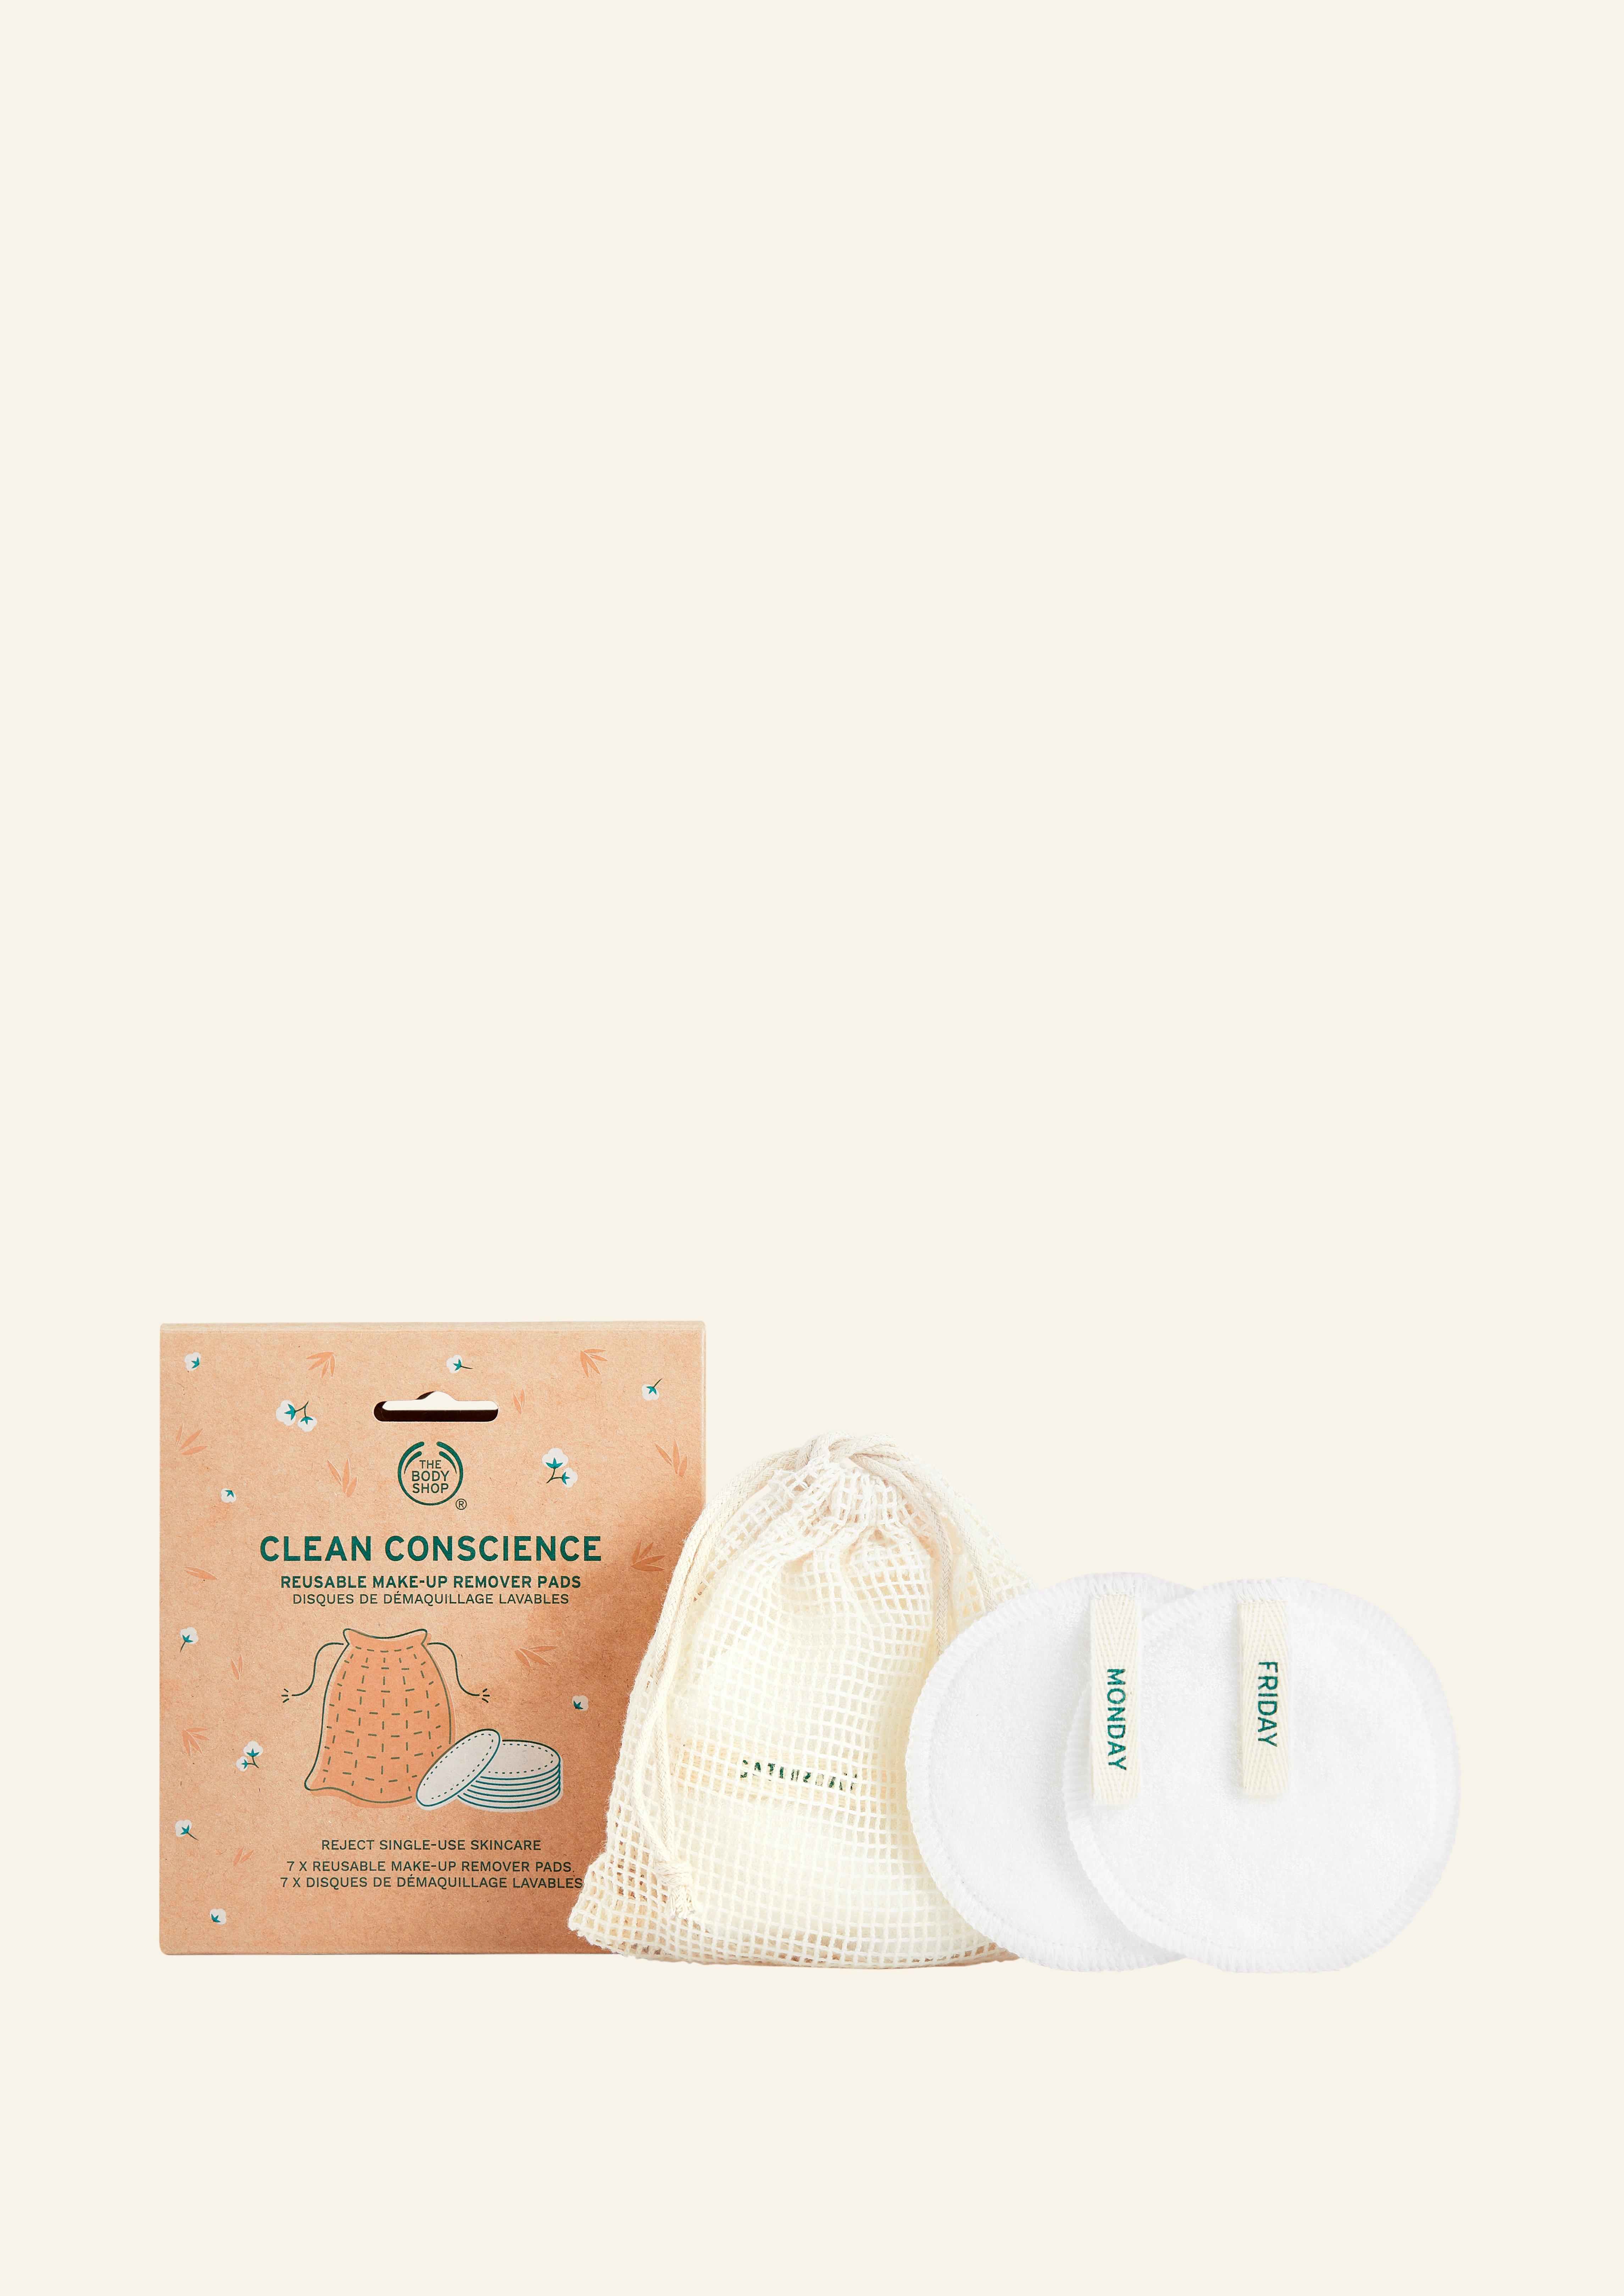 Clean Conscience Reusable Make-Up Remover Pads | Skincare & Makeup offers